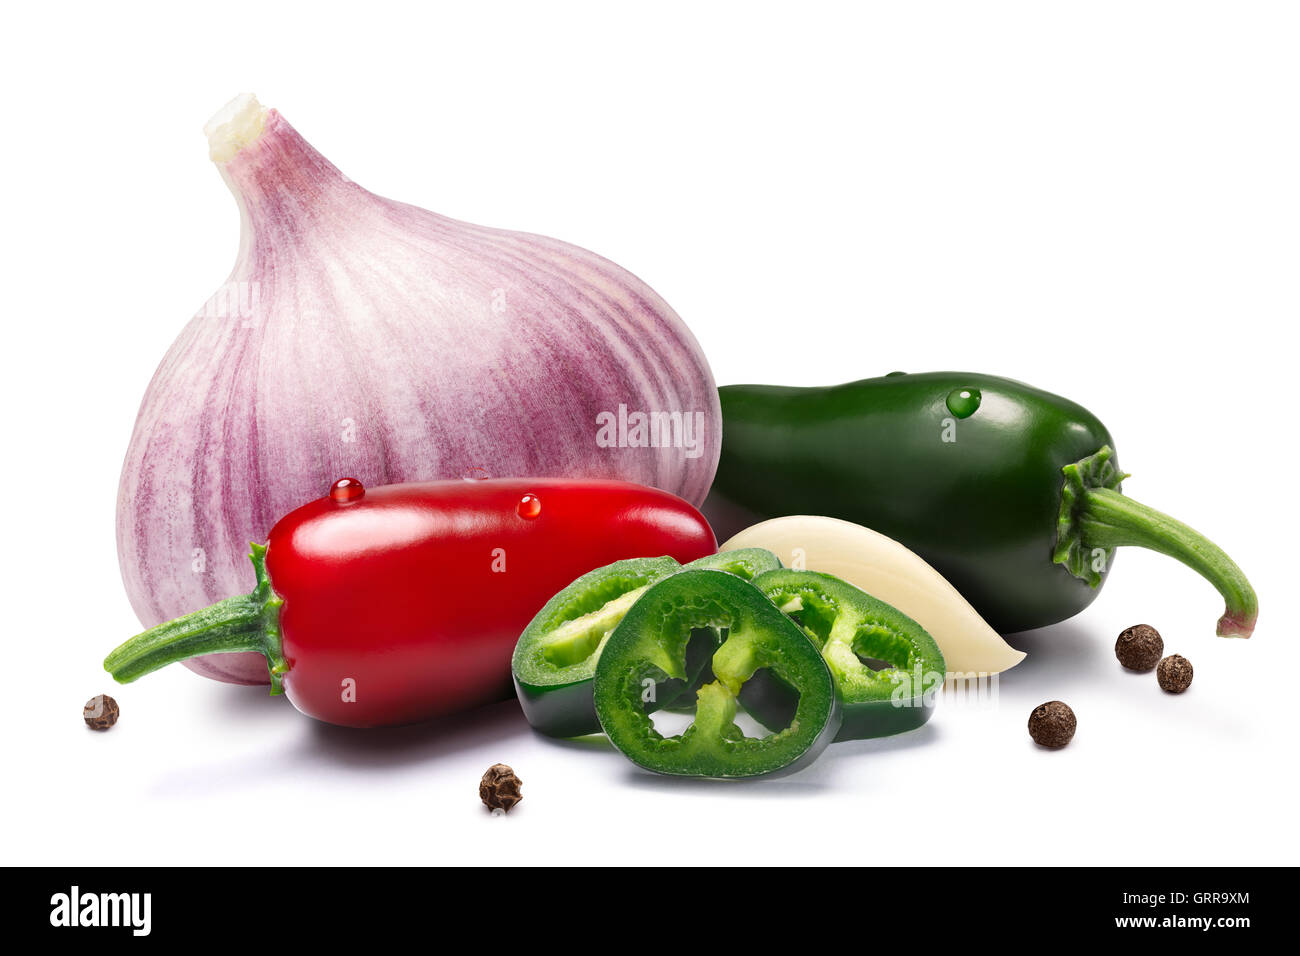 Garlic bulb and cloves with mild Jalapeno peppers and peppercorns together. Clipping paths, shadows separated. Design elements Stock Photo